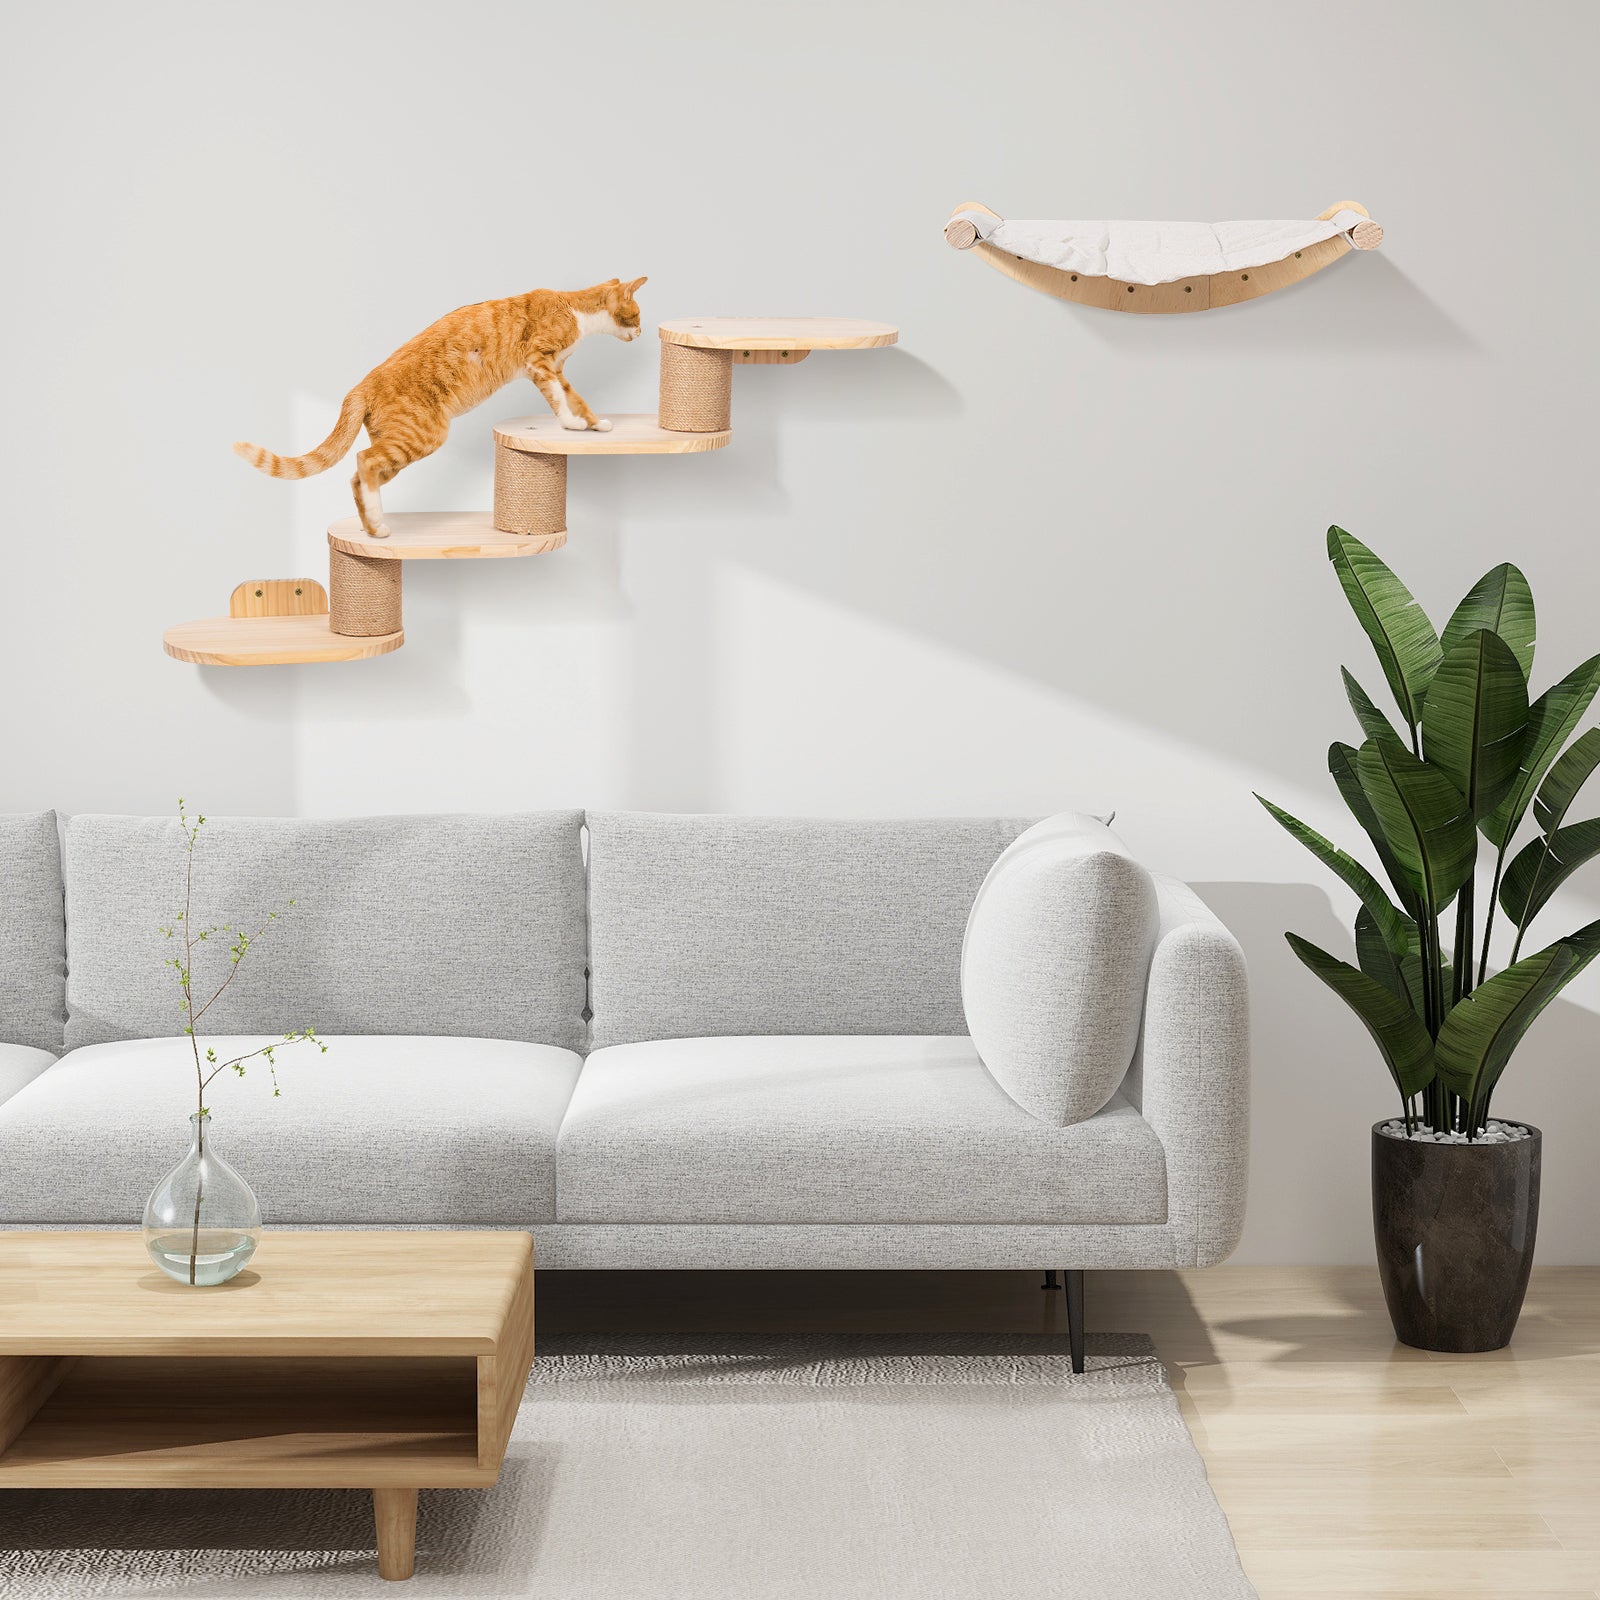 Wall-Mounted-Cat-Climbing-Wall-with-Cat-Stairs-and-Cat-Hammock-Four-Level-Cat-Climbing-Wall-with-Jute-Stripes-for-Cats-and-Non-Slip-Mat-2-in-1-Cat-Ladder-Wall-Mounted-Cat-Climbing-Wall